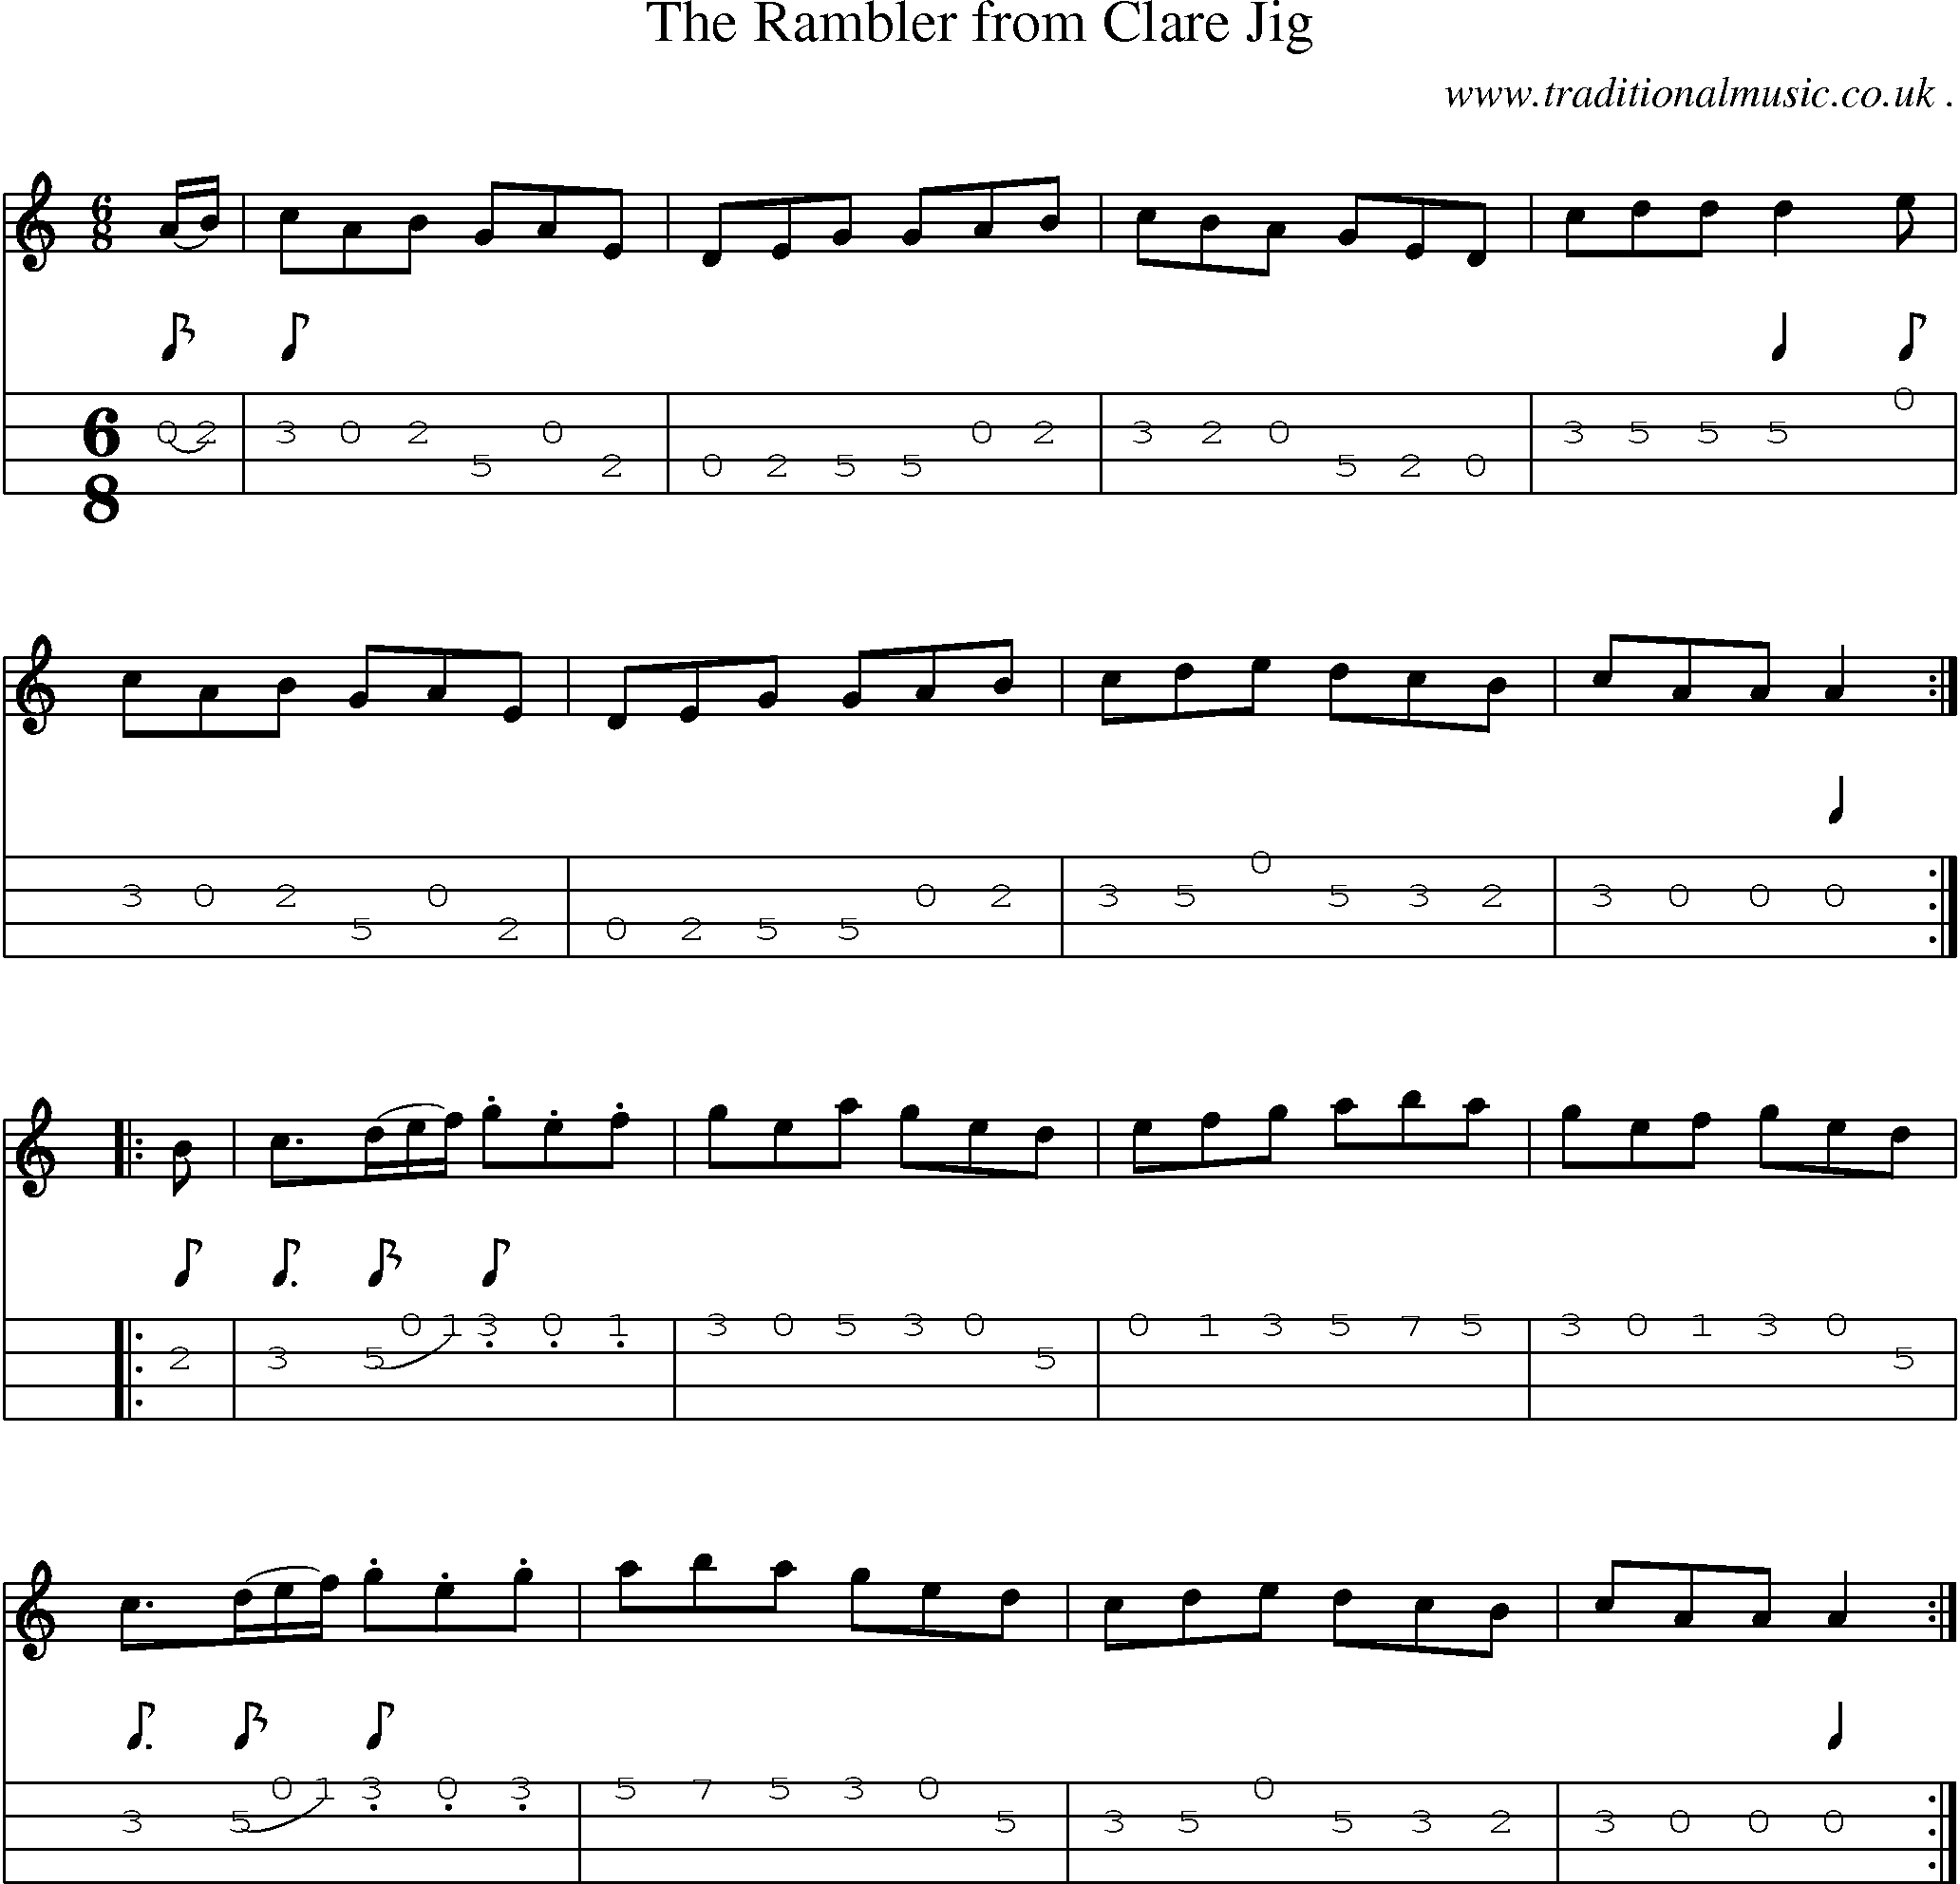 Sheet-Music and Mandolin Tabs for The Rambler From Clare Jig